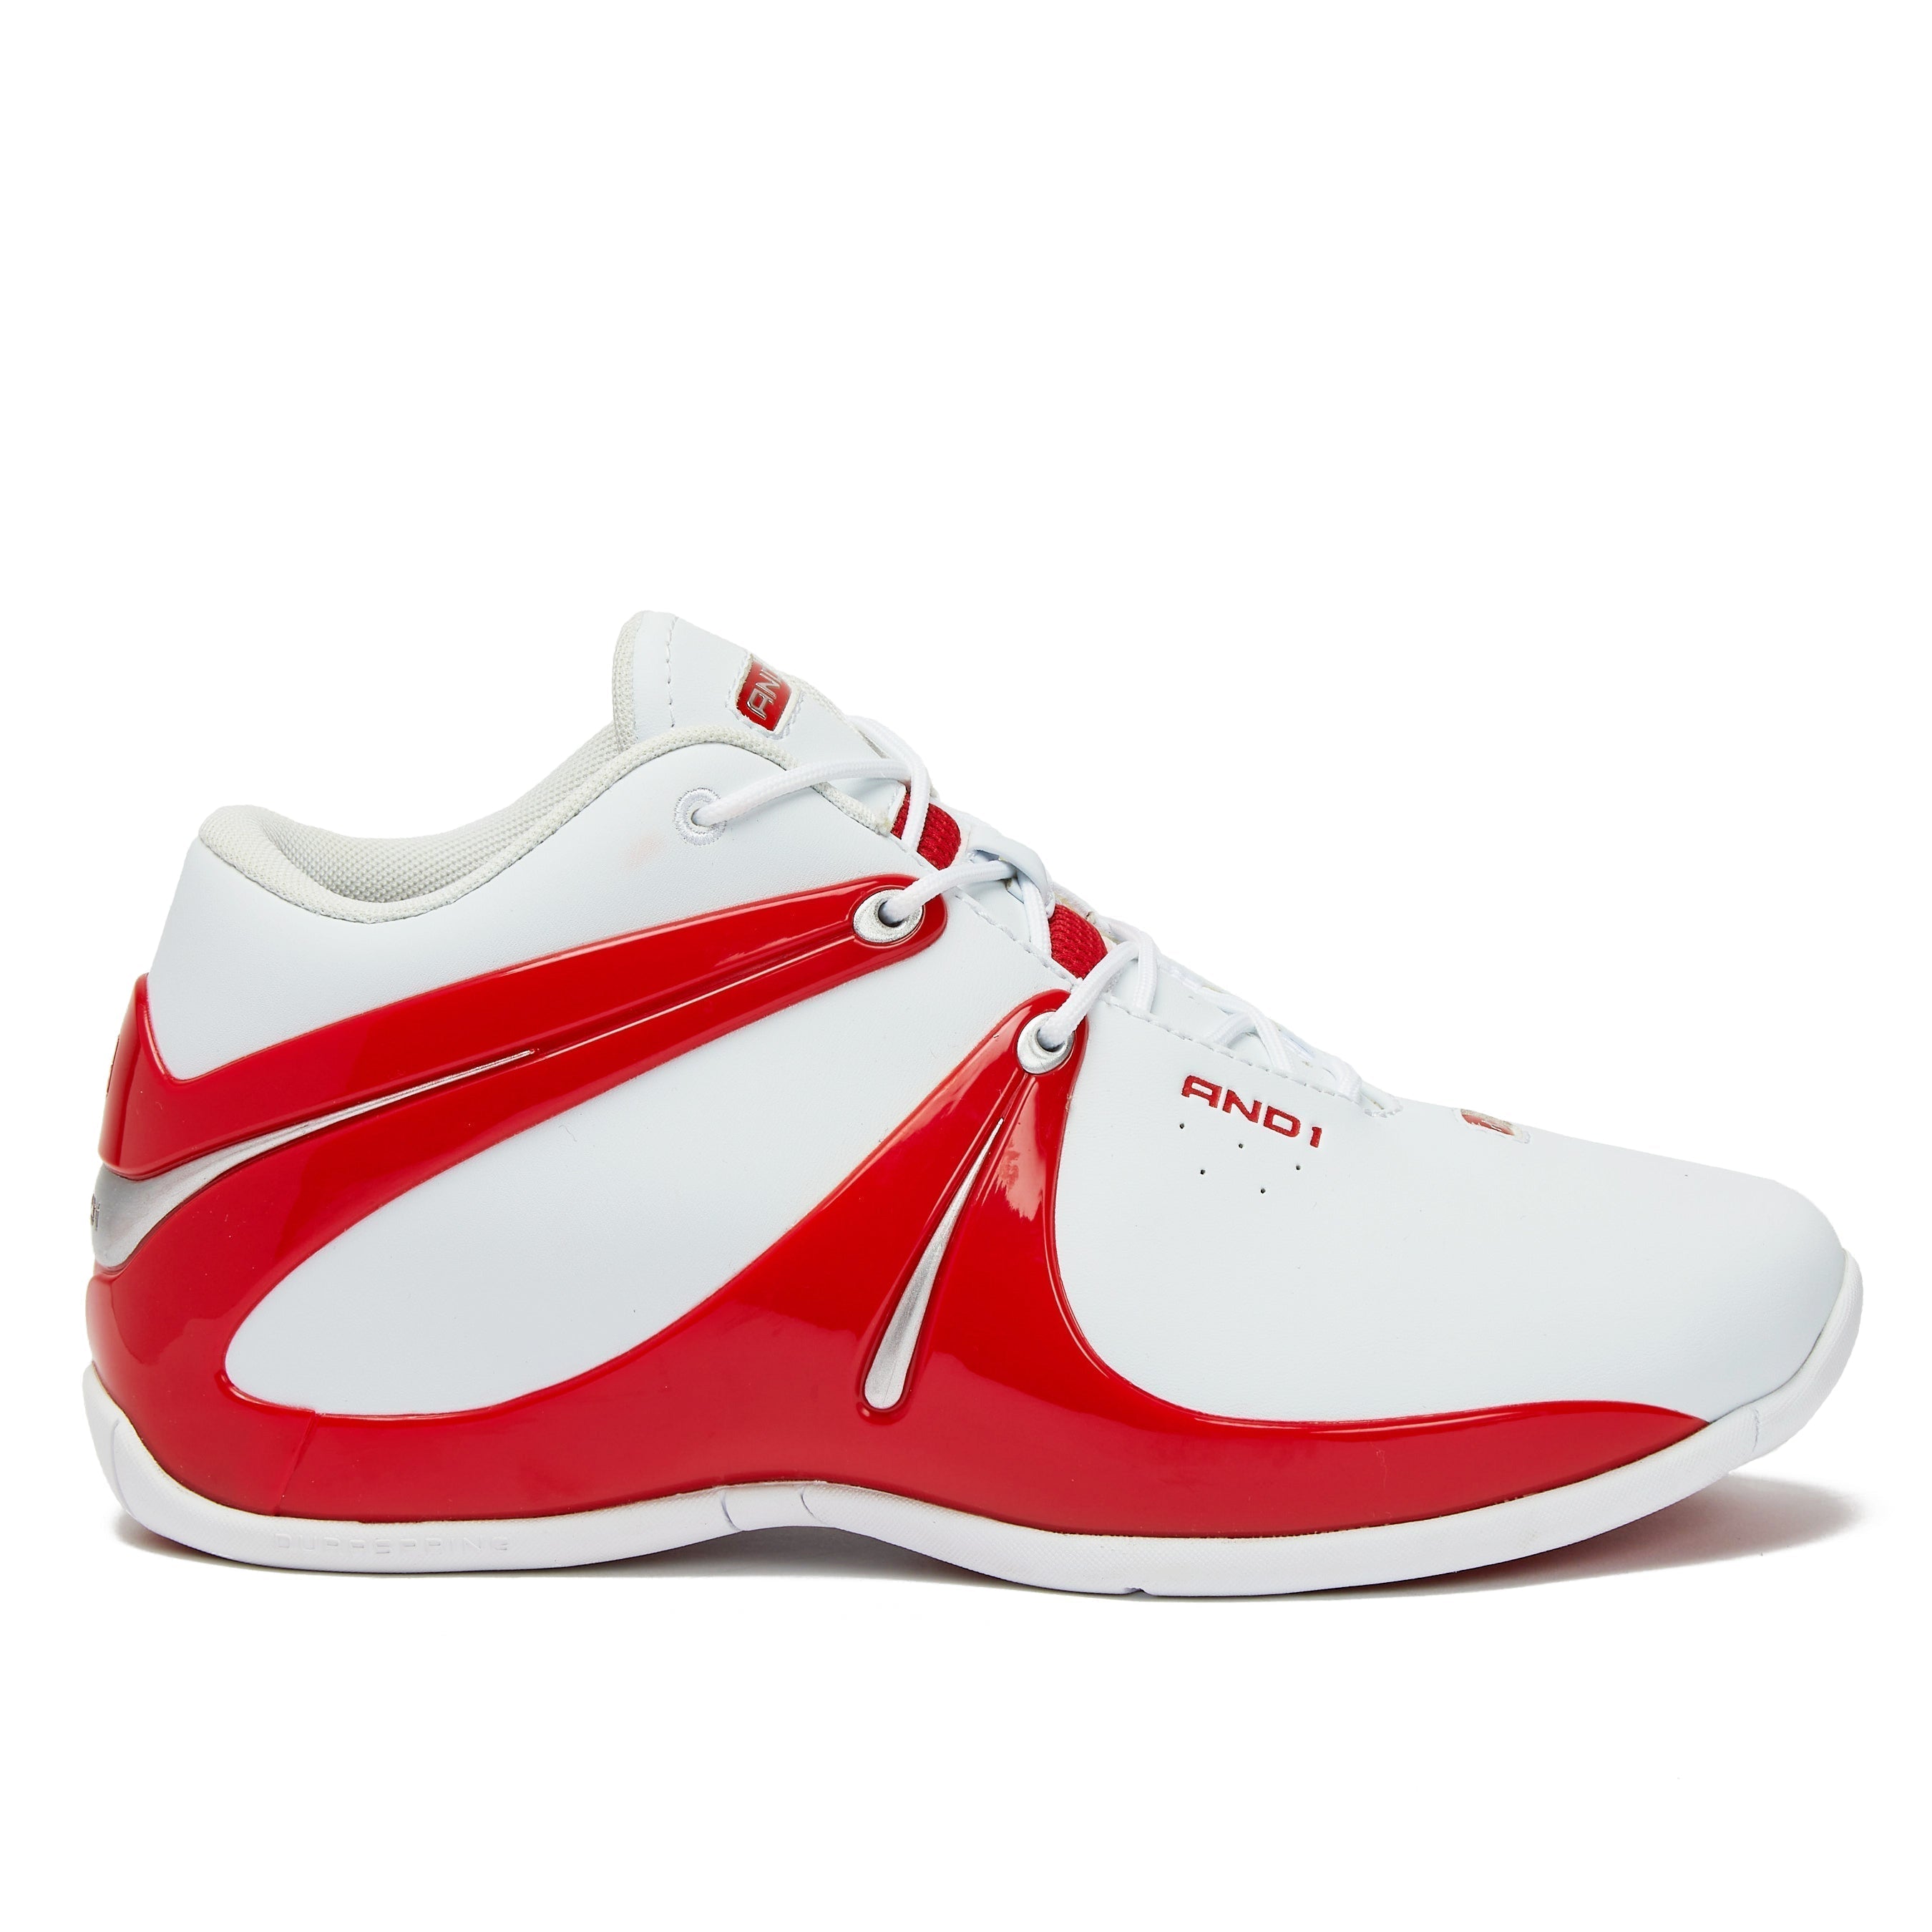 AND1 Basketball Shoes  Men's and Women's Basketball Shoes –